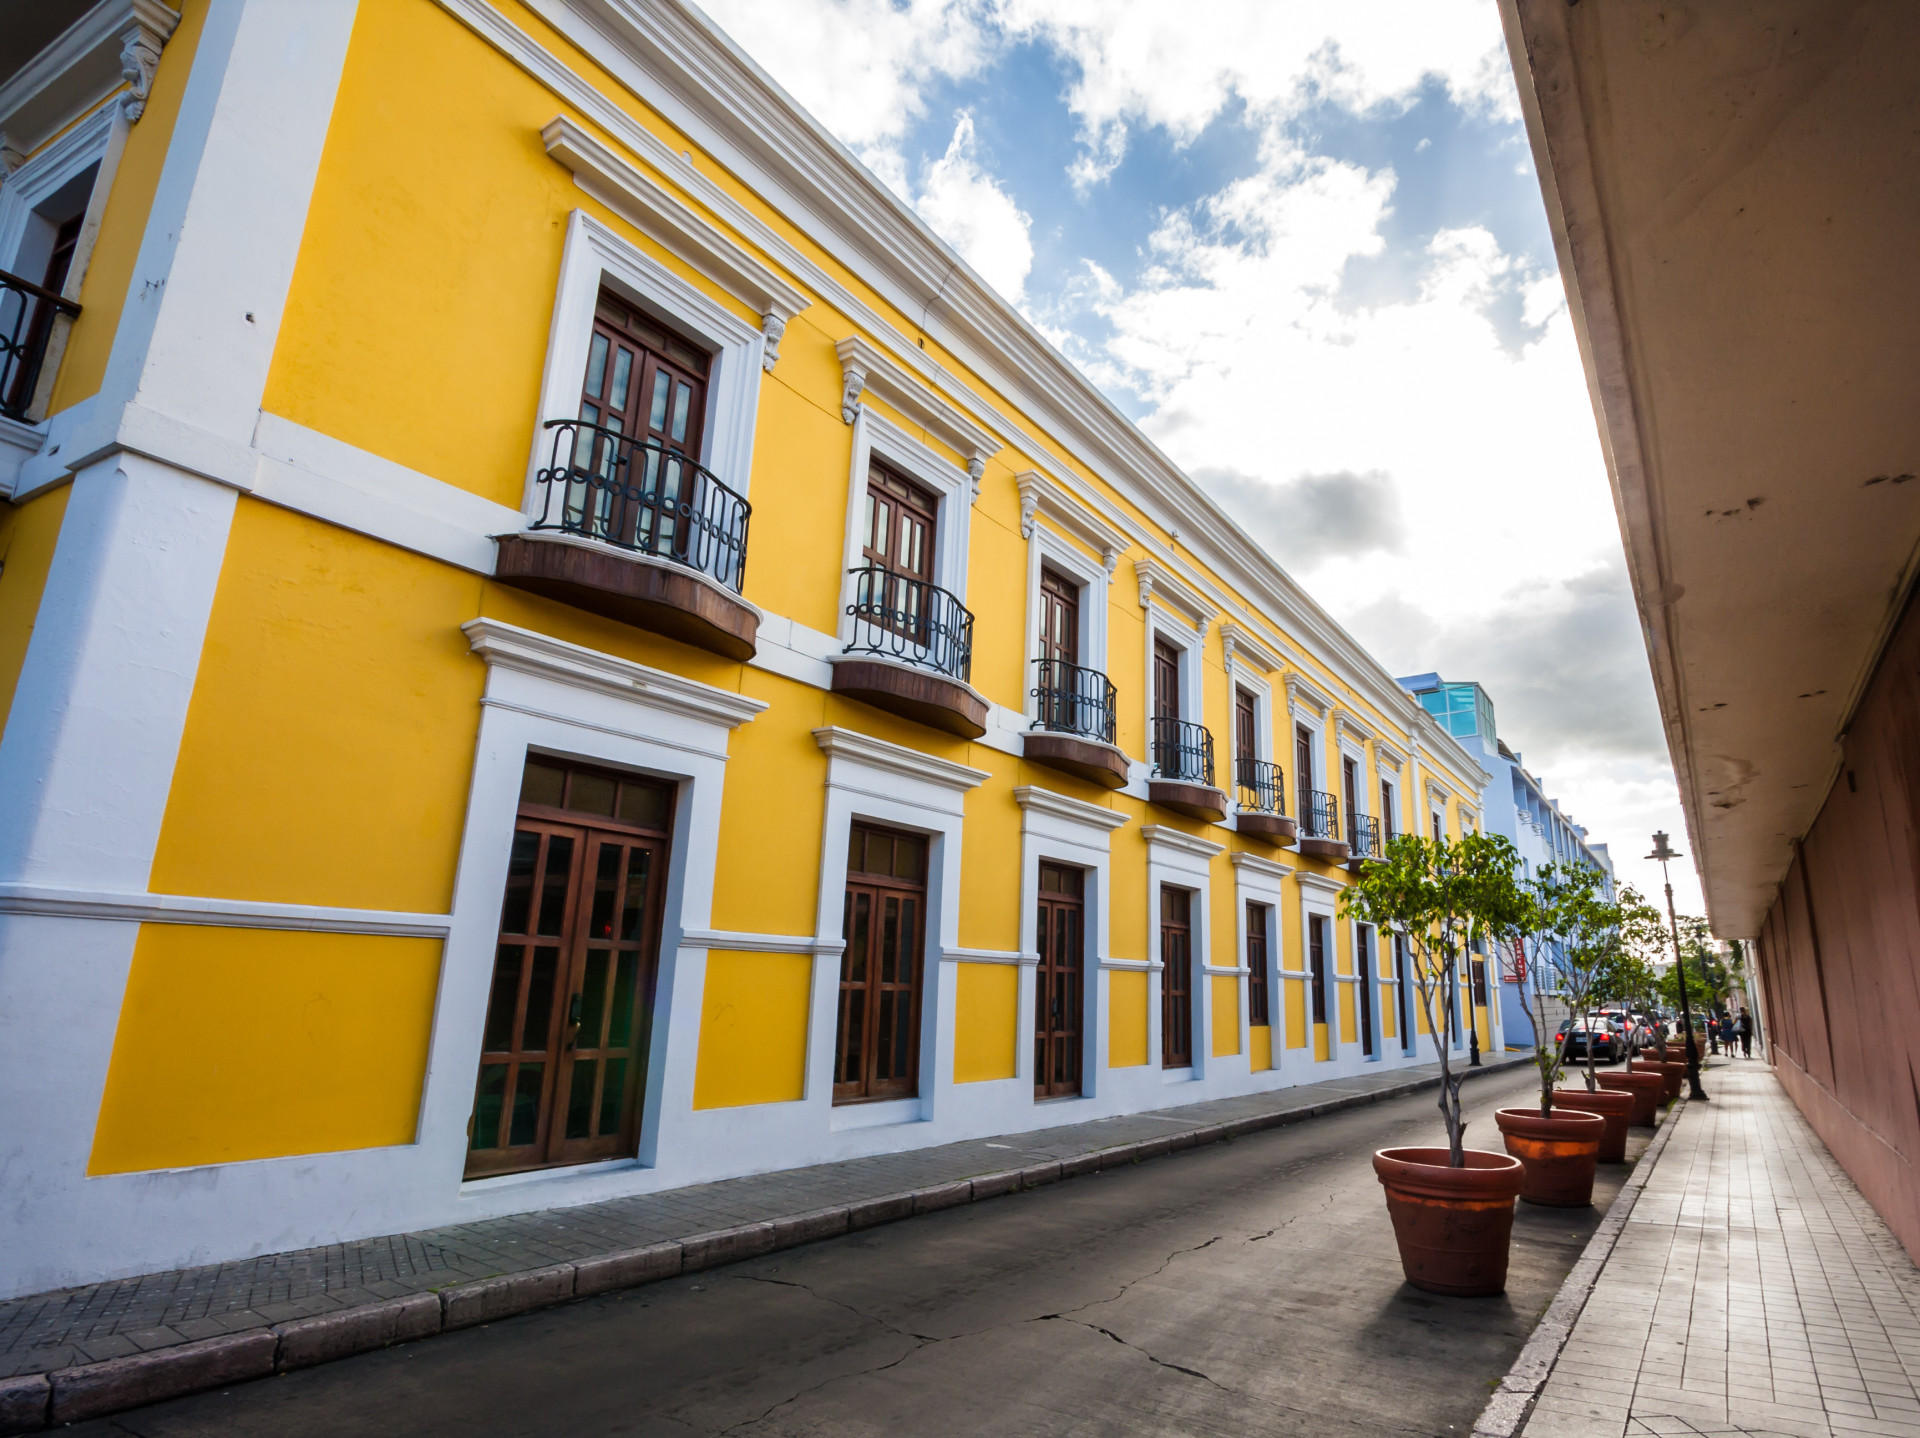 This historic city in the southern part of Puerto Rico houses great examples of colonial architecture and well-preserved mansions. Walk to La Guancha Paseo Tablado boardwalk on the coast for great restaurants and bars.<p><a href="https://www.msn.com/en-us/community/channel/vid-7xx8mnucu55yw63we9va2gwr7uihbxwc68fxqp25x6tg4ftibpra?cvid=94631541bc0f4f89bfd59158d696ad7e">Follow us and access great exclusive content every day</a></p>